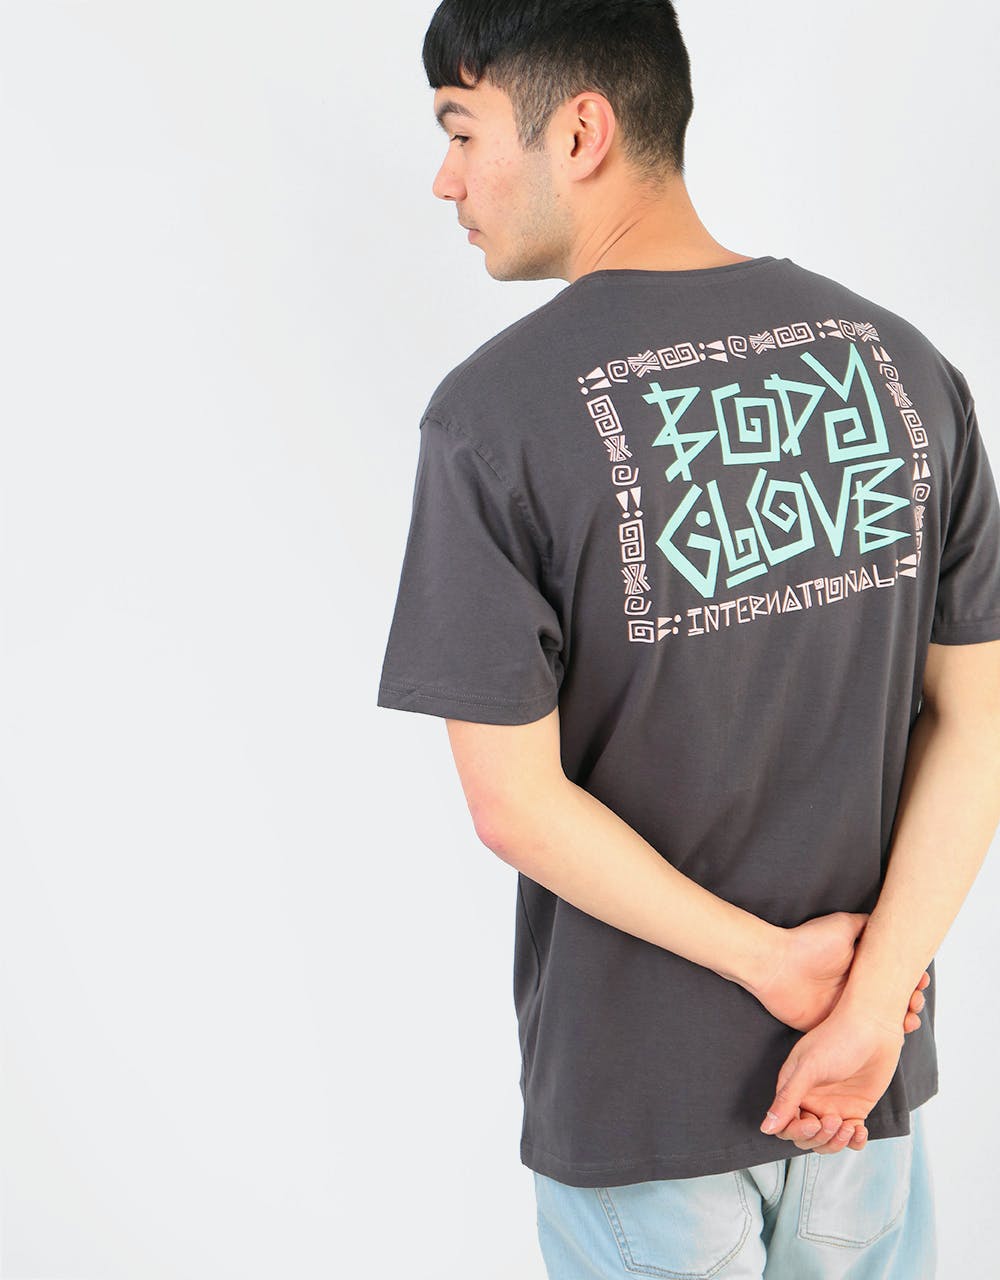 Body Glove Kindred T-Shirt - Washed Black